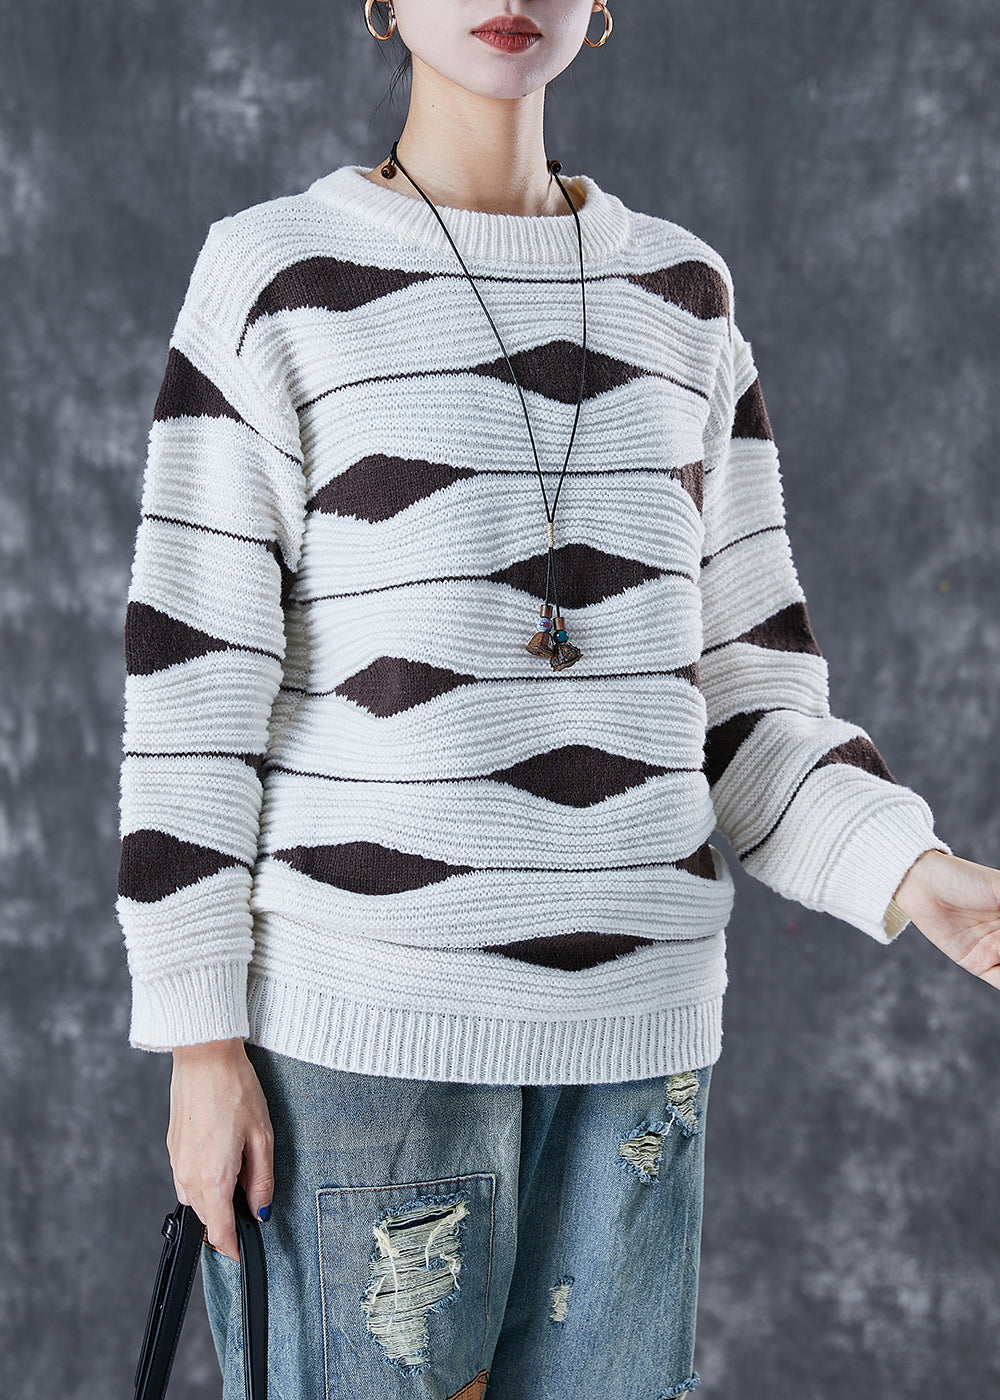 White Print Thick Knit Tops Oversized Winter